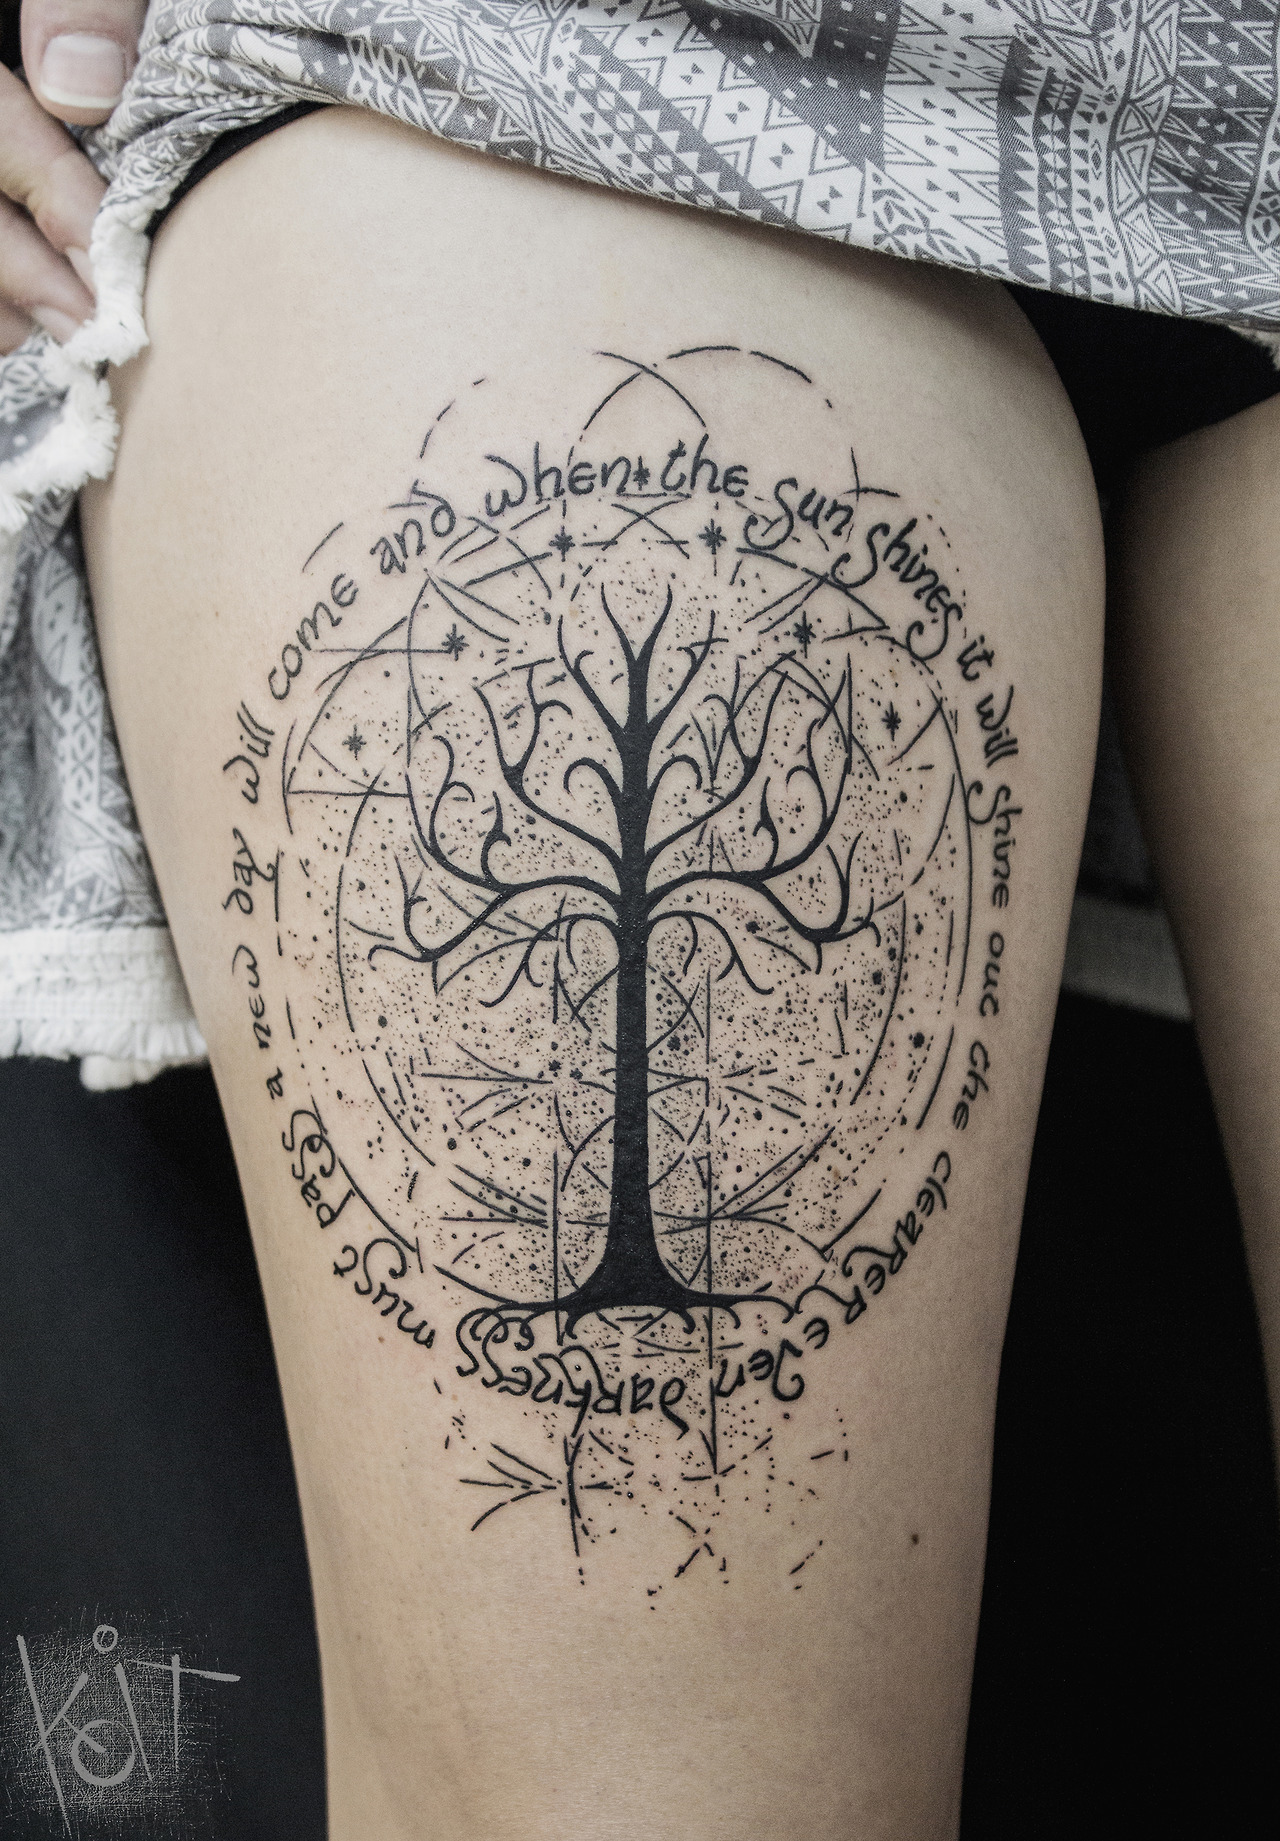 White Tree of GondorShard of Narsil by Chance Gomez from Collective Tattoo  Parlor in Las Vegas NV  rtattoos